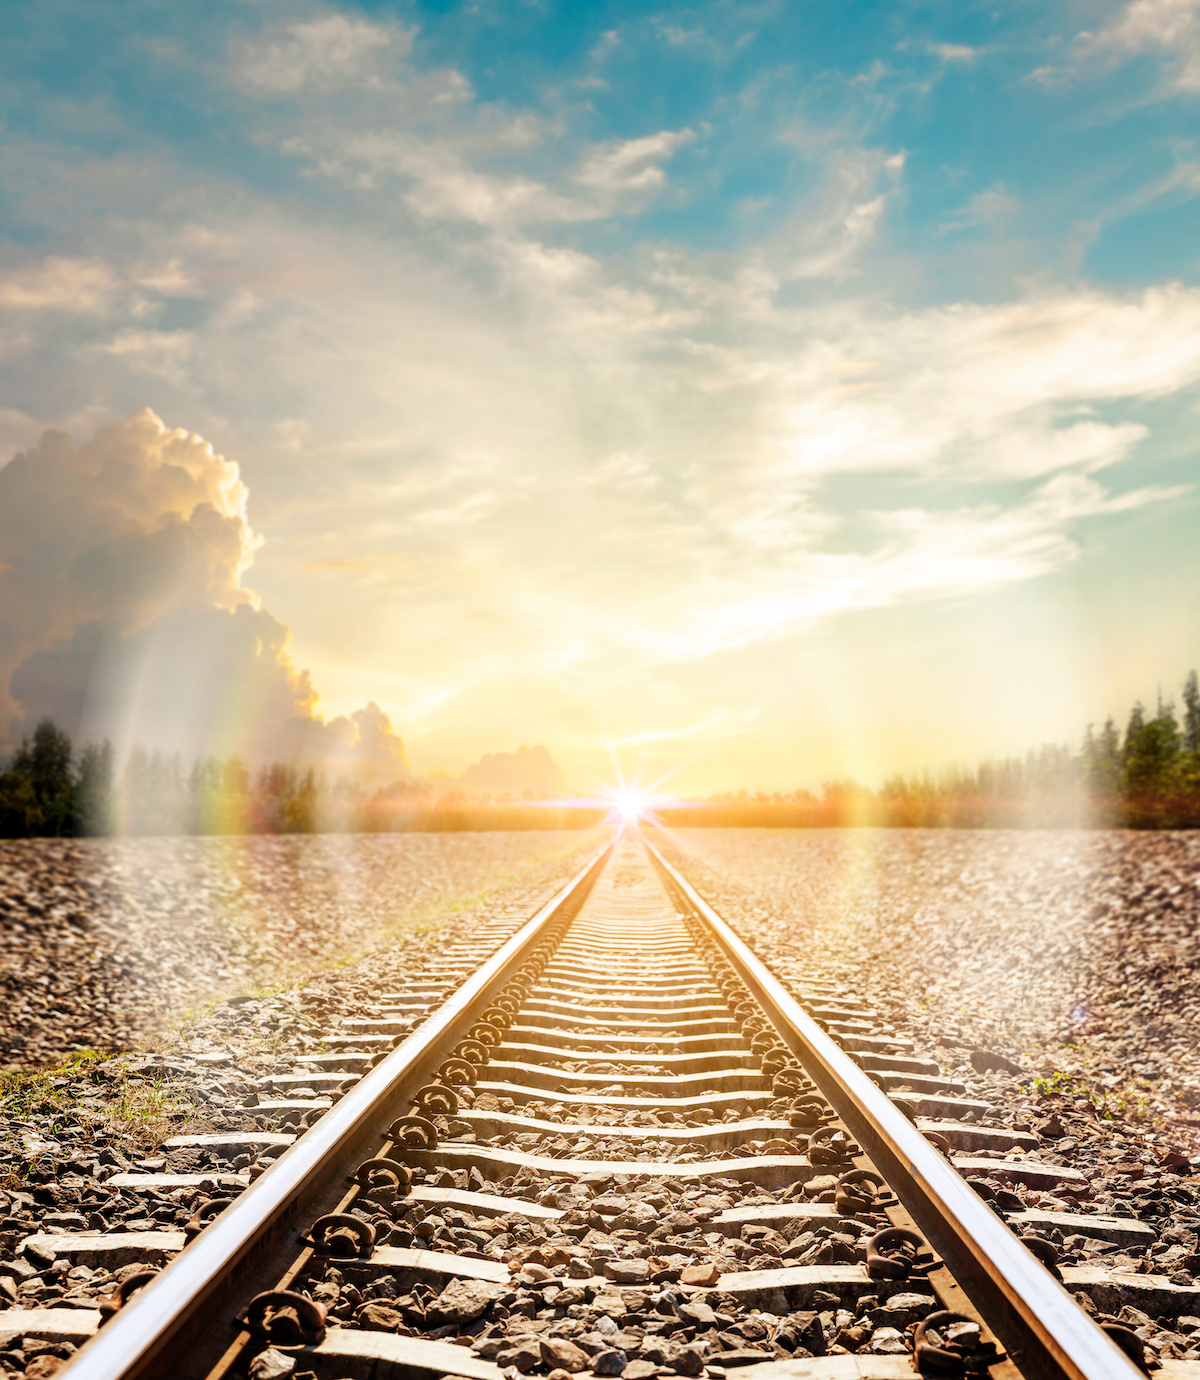 The longest railroad tracks with lens flare lighting.